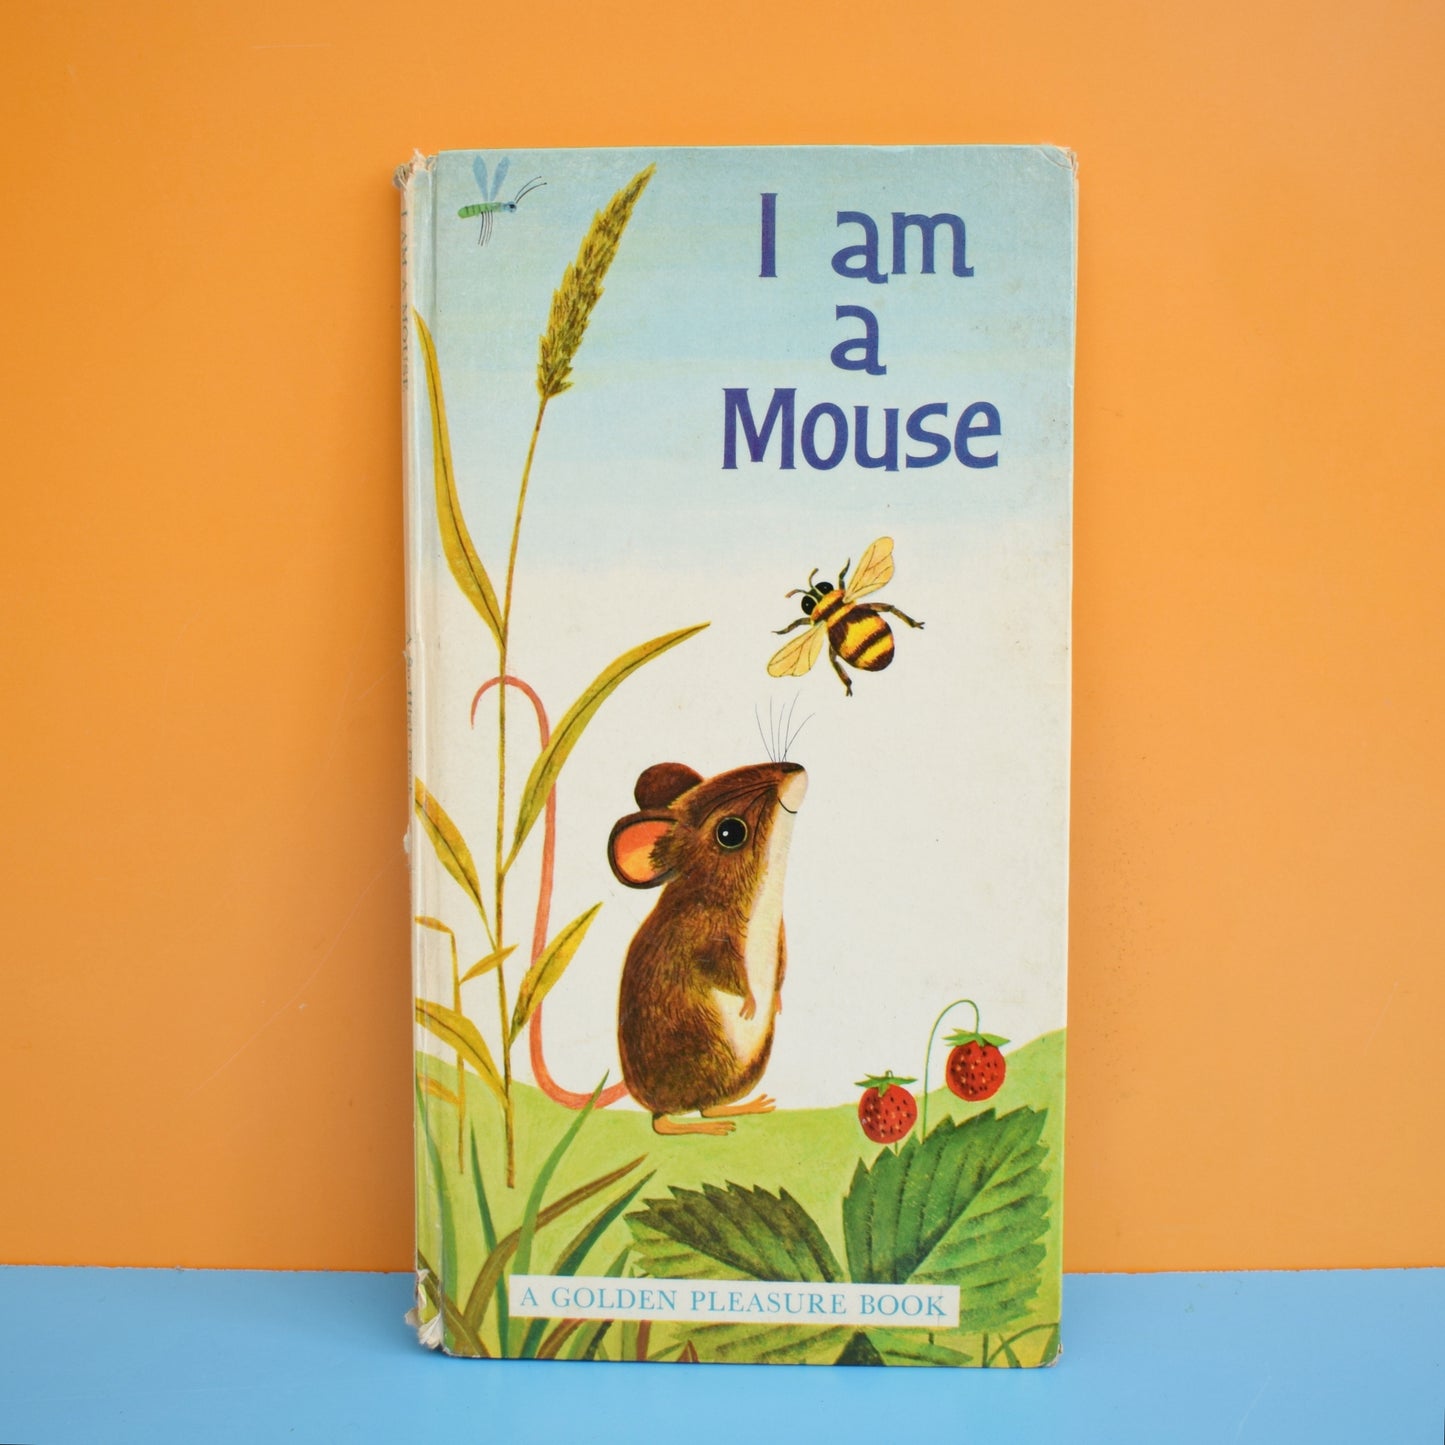 Vintage 1960s Books - I am A Fox / Mouse - Fab Illustrations